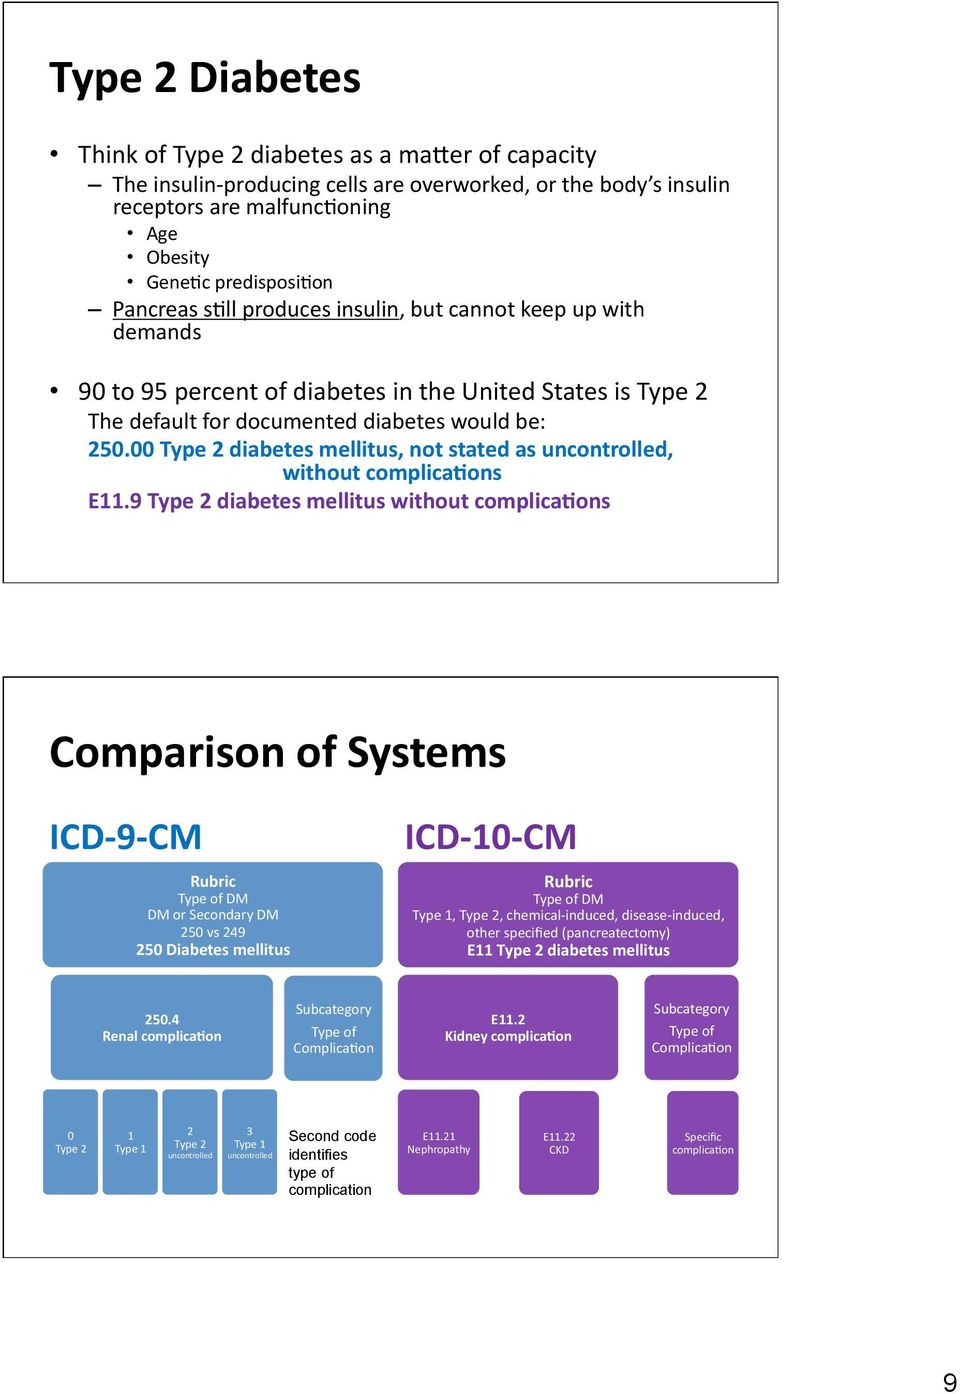 icd 10 type 1 diabetes uncontrolled)